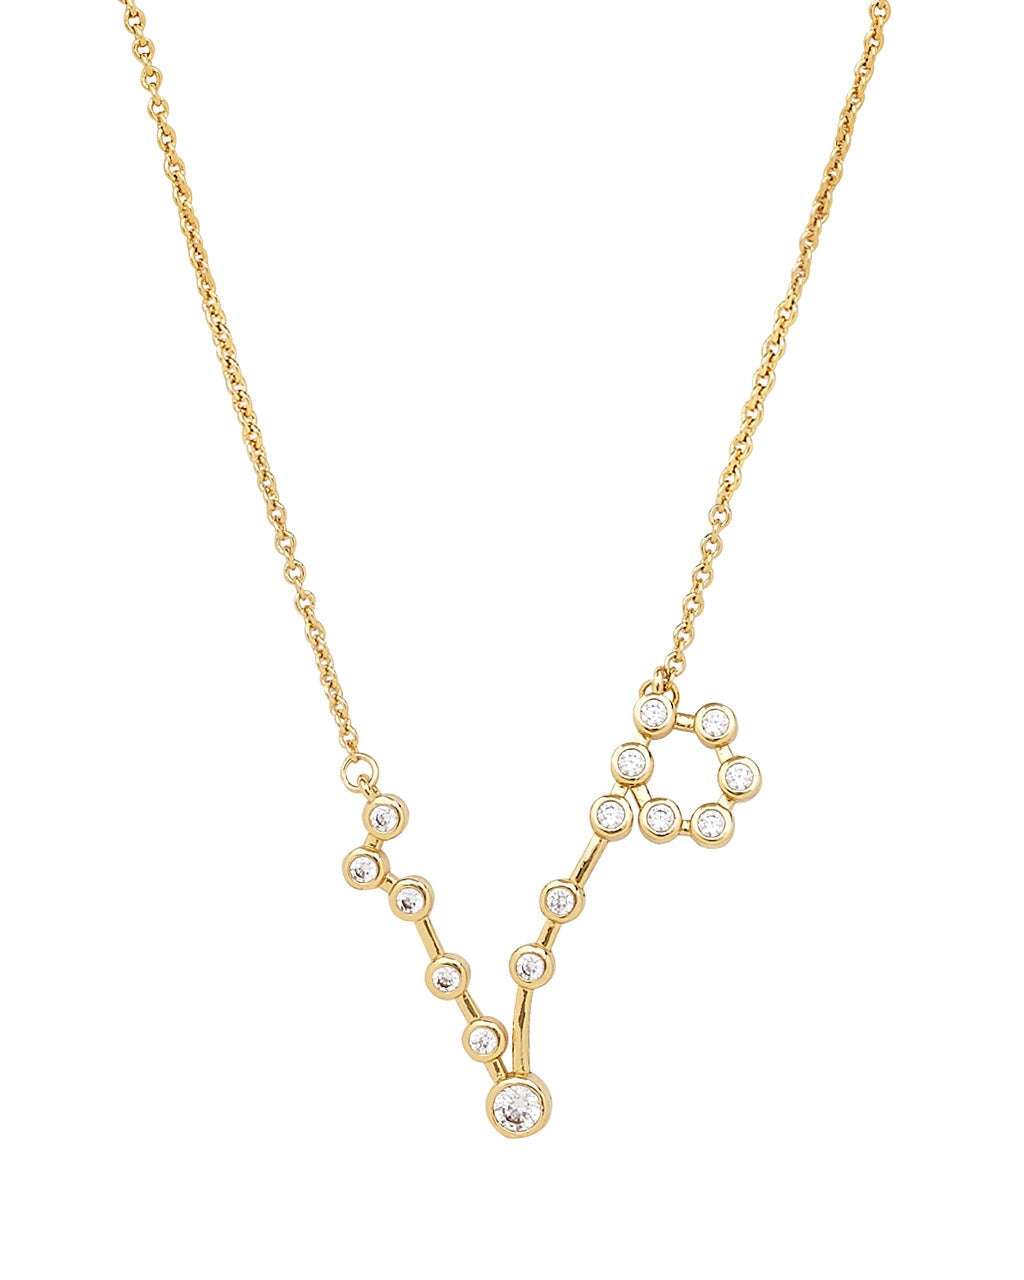 'When Stars Align' Constellation Necklace Necklace Sterling Forever Gold Pisces (Feb 19 - Mar 20) 